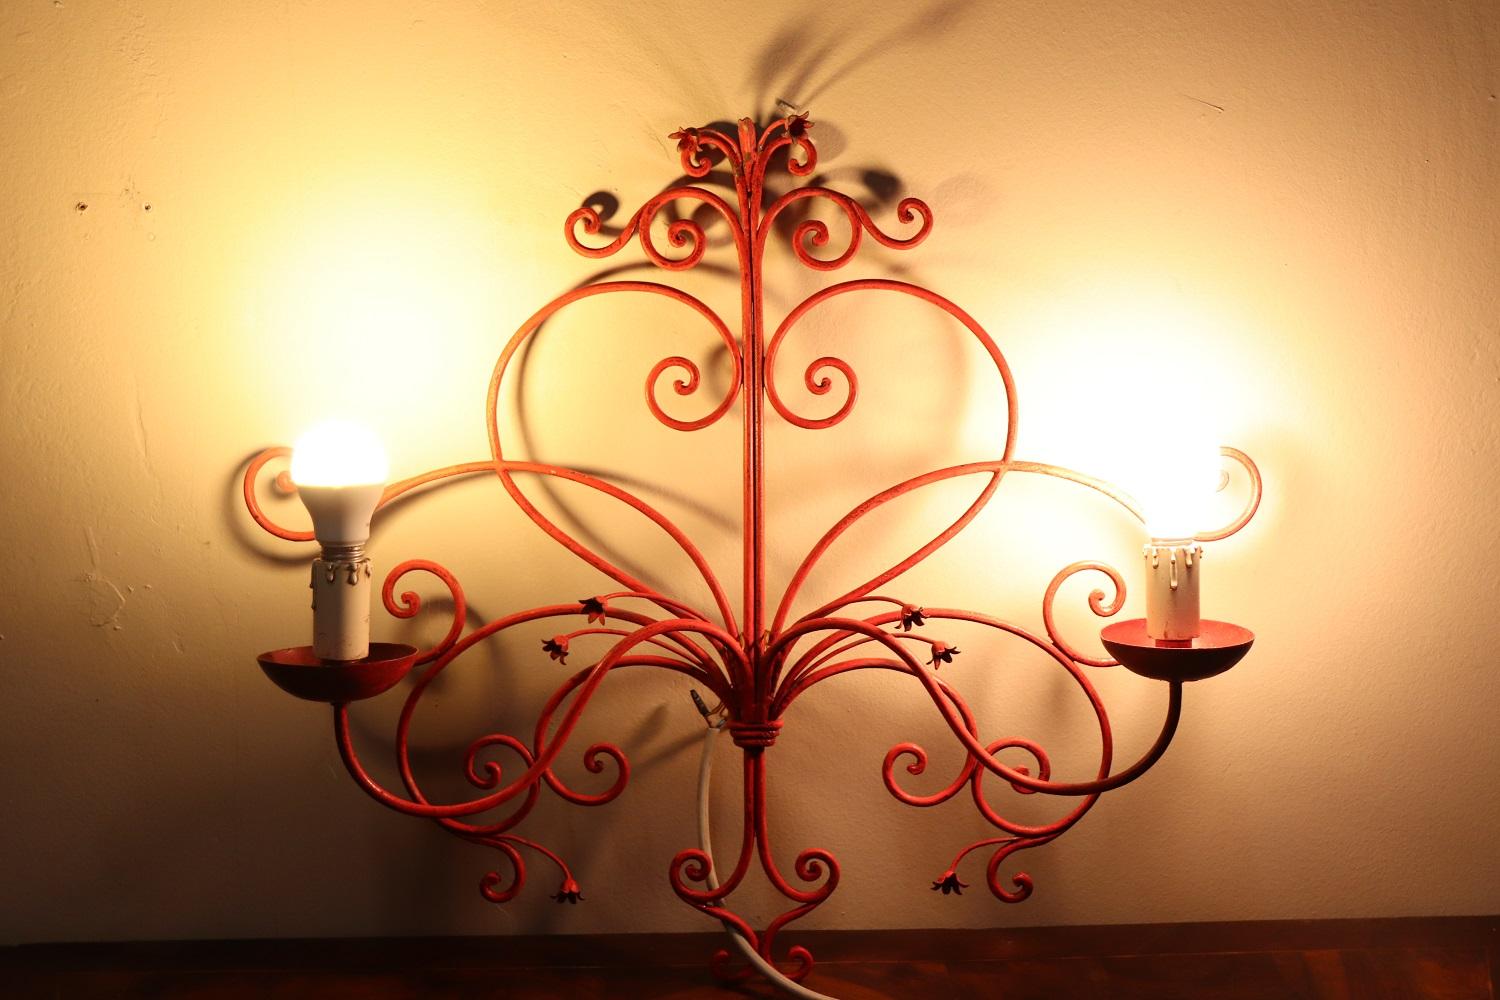 Beautiful and refined Italian early 20th century wall light or sconce with two lights. Made of red lacquered iron with elaborate decoration many spirals. Very decorative perfect for your wall. Signs of wear in the lacquer.